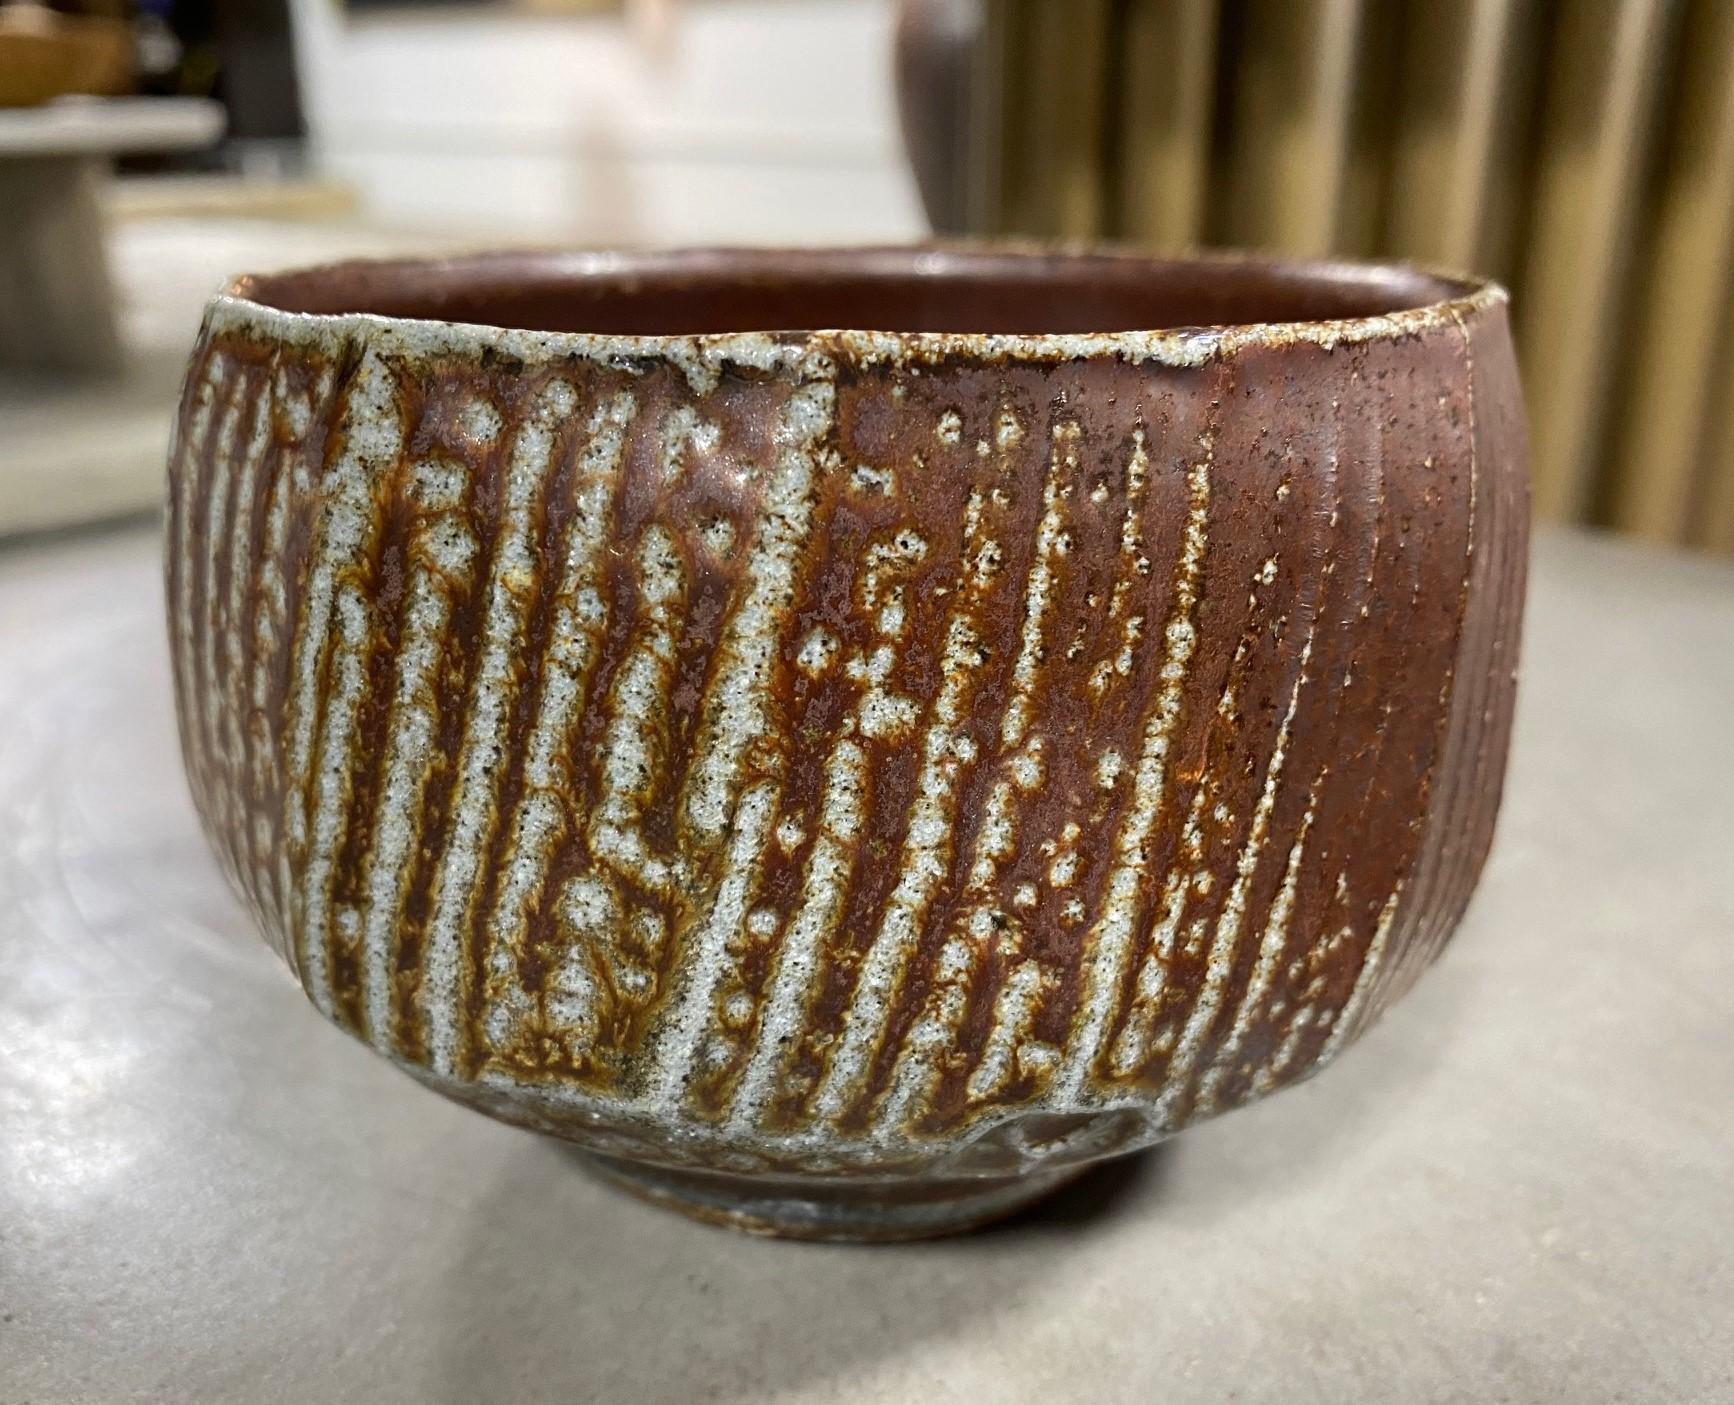 A stunning Japanese stoneware Studio Pottery chawan tea bowl that features a beautiful dark rich glaze with wonderful shifts in pattern and texture. 

This particular piece encompasses the Japanese Wabi-Sabi aesthetic (which is so revered and